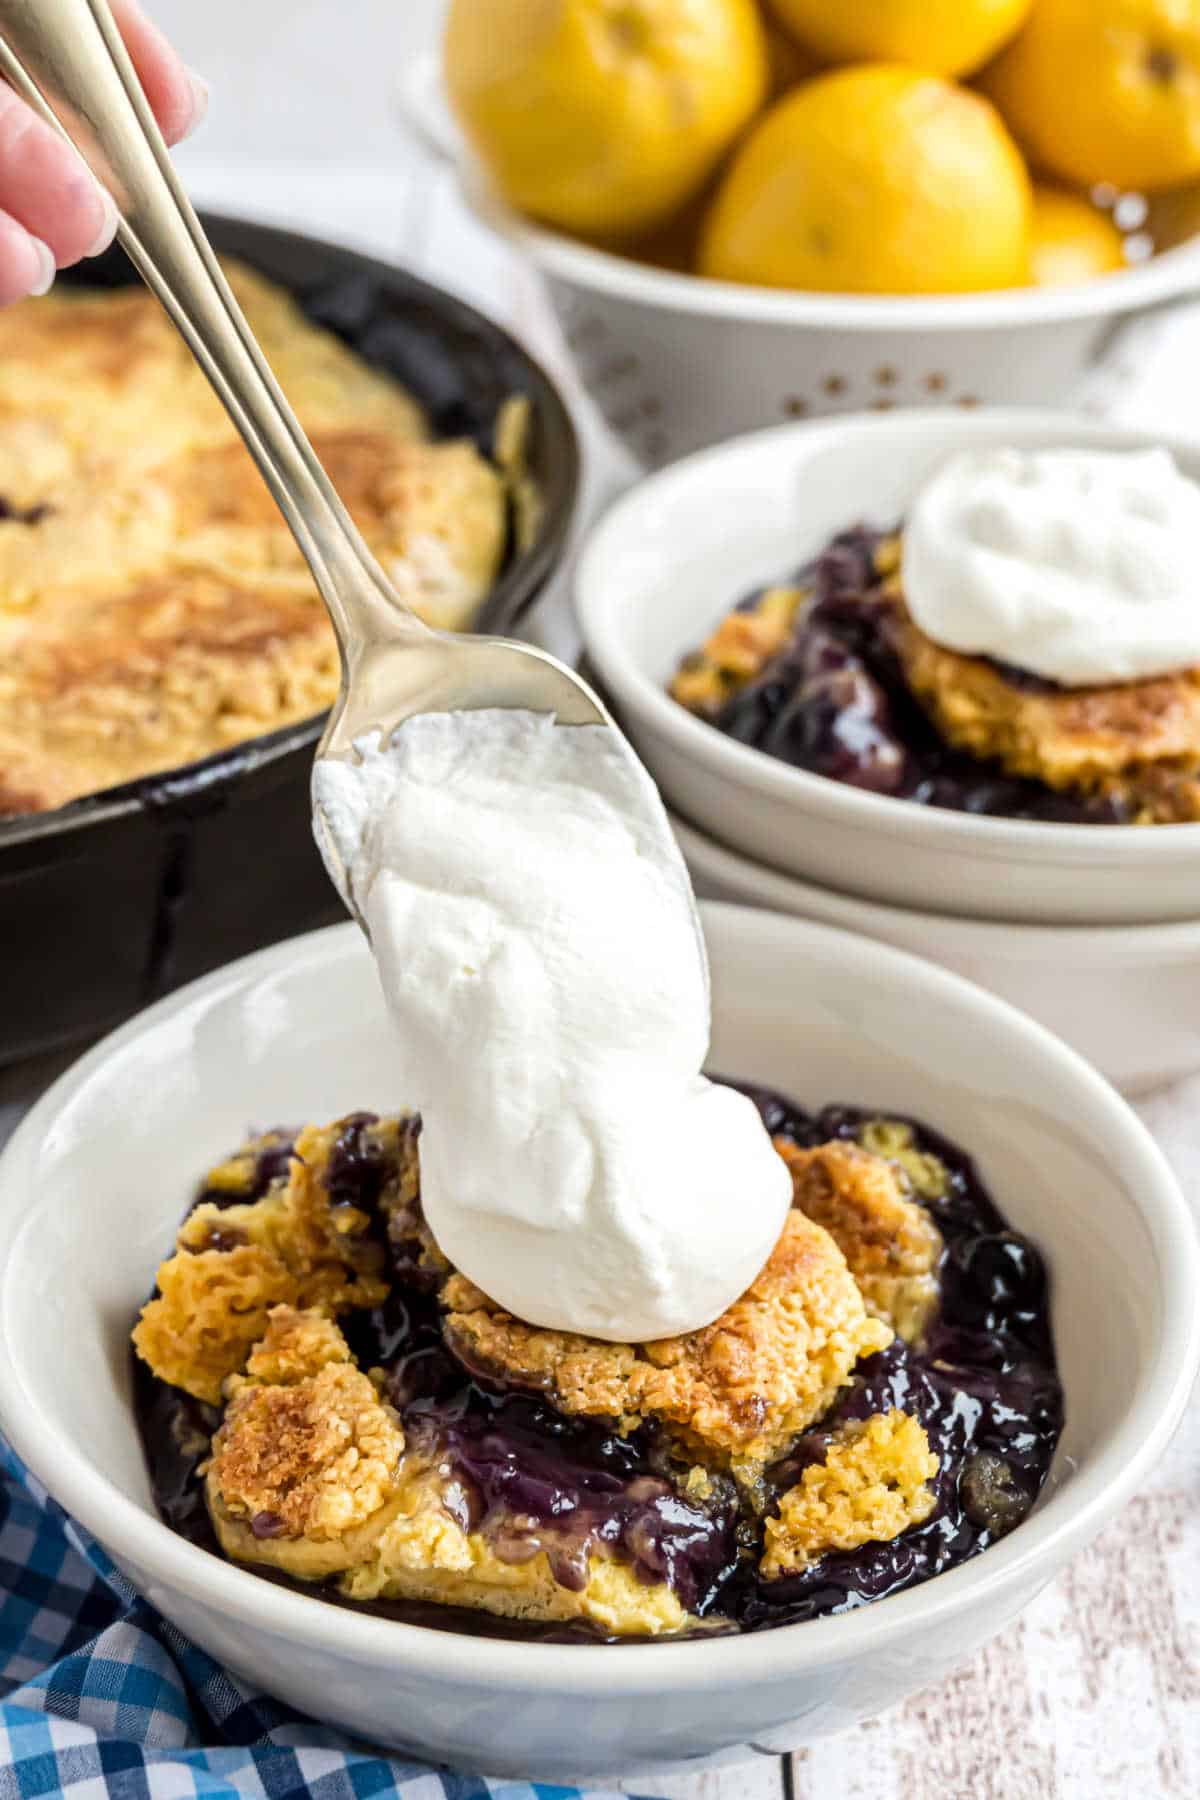 Blueberry cake with a dollop of whipped cream being put on top.